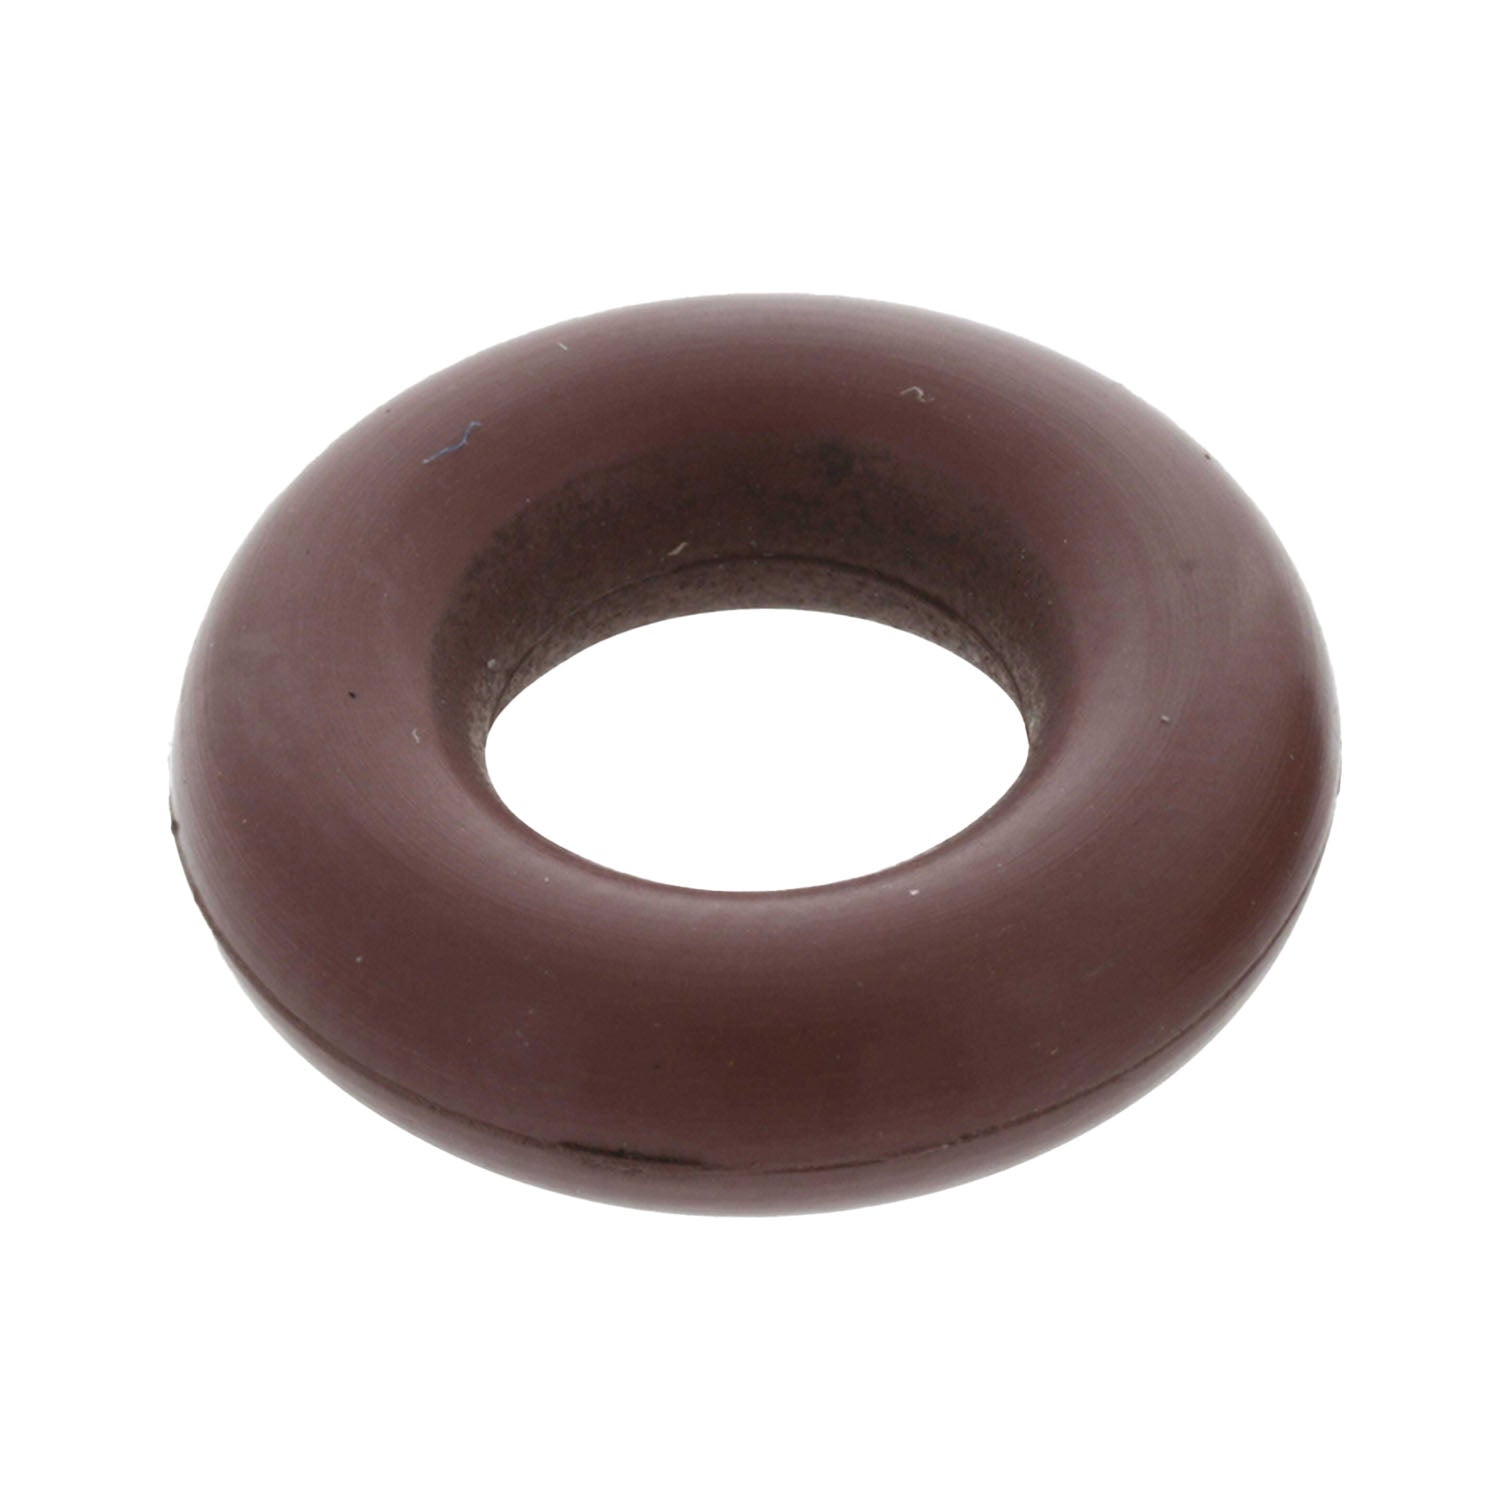 Small, thick, reddish-brown rubber o-ring on a white background. HM0017